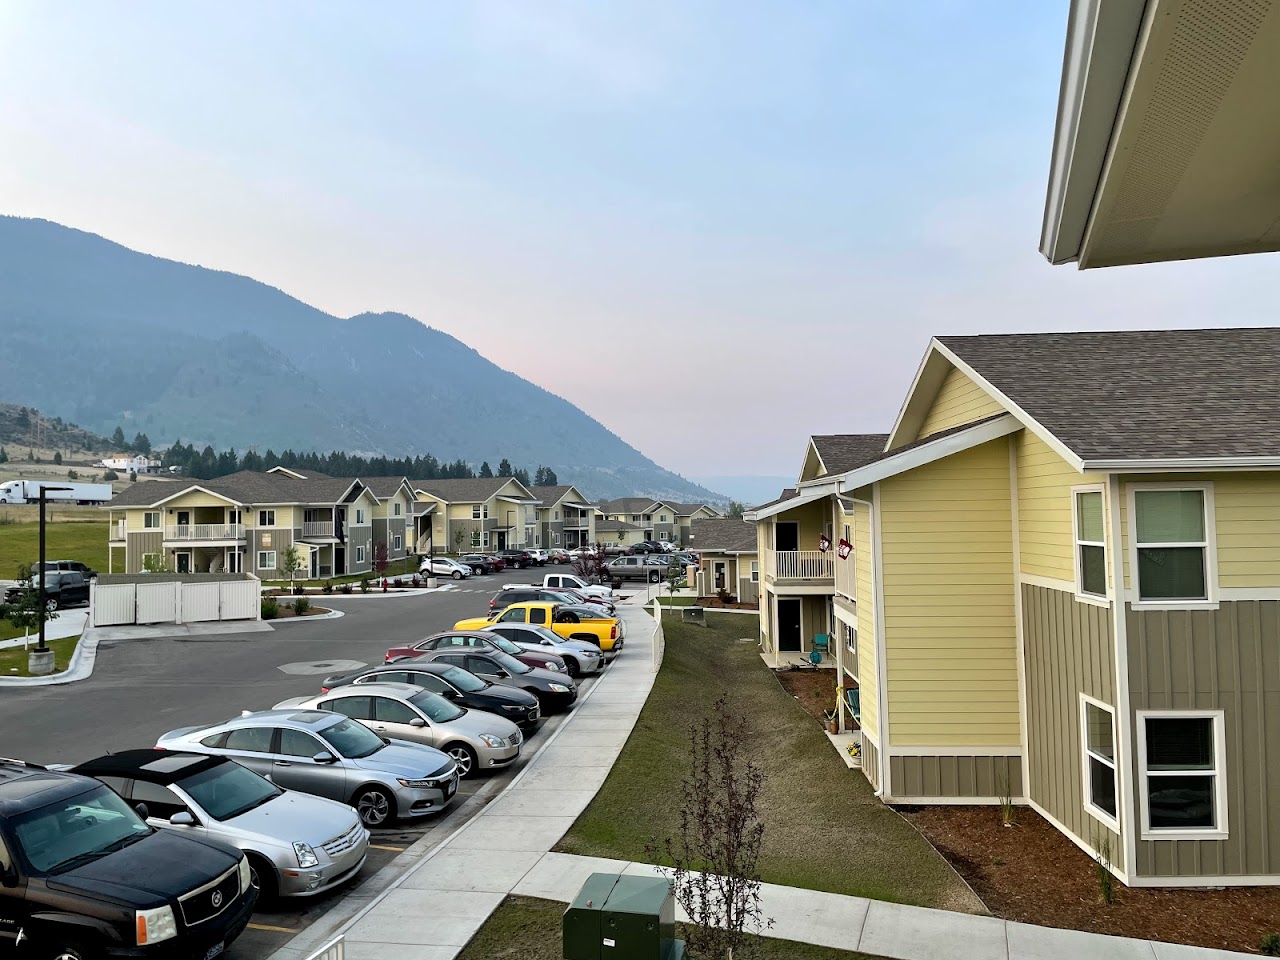 Photo of COPPER RIDGE 9. Affordable housing located at 119 ELDERBERRY LANE BUTTE, MT 59701